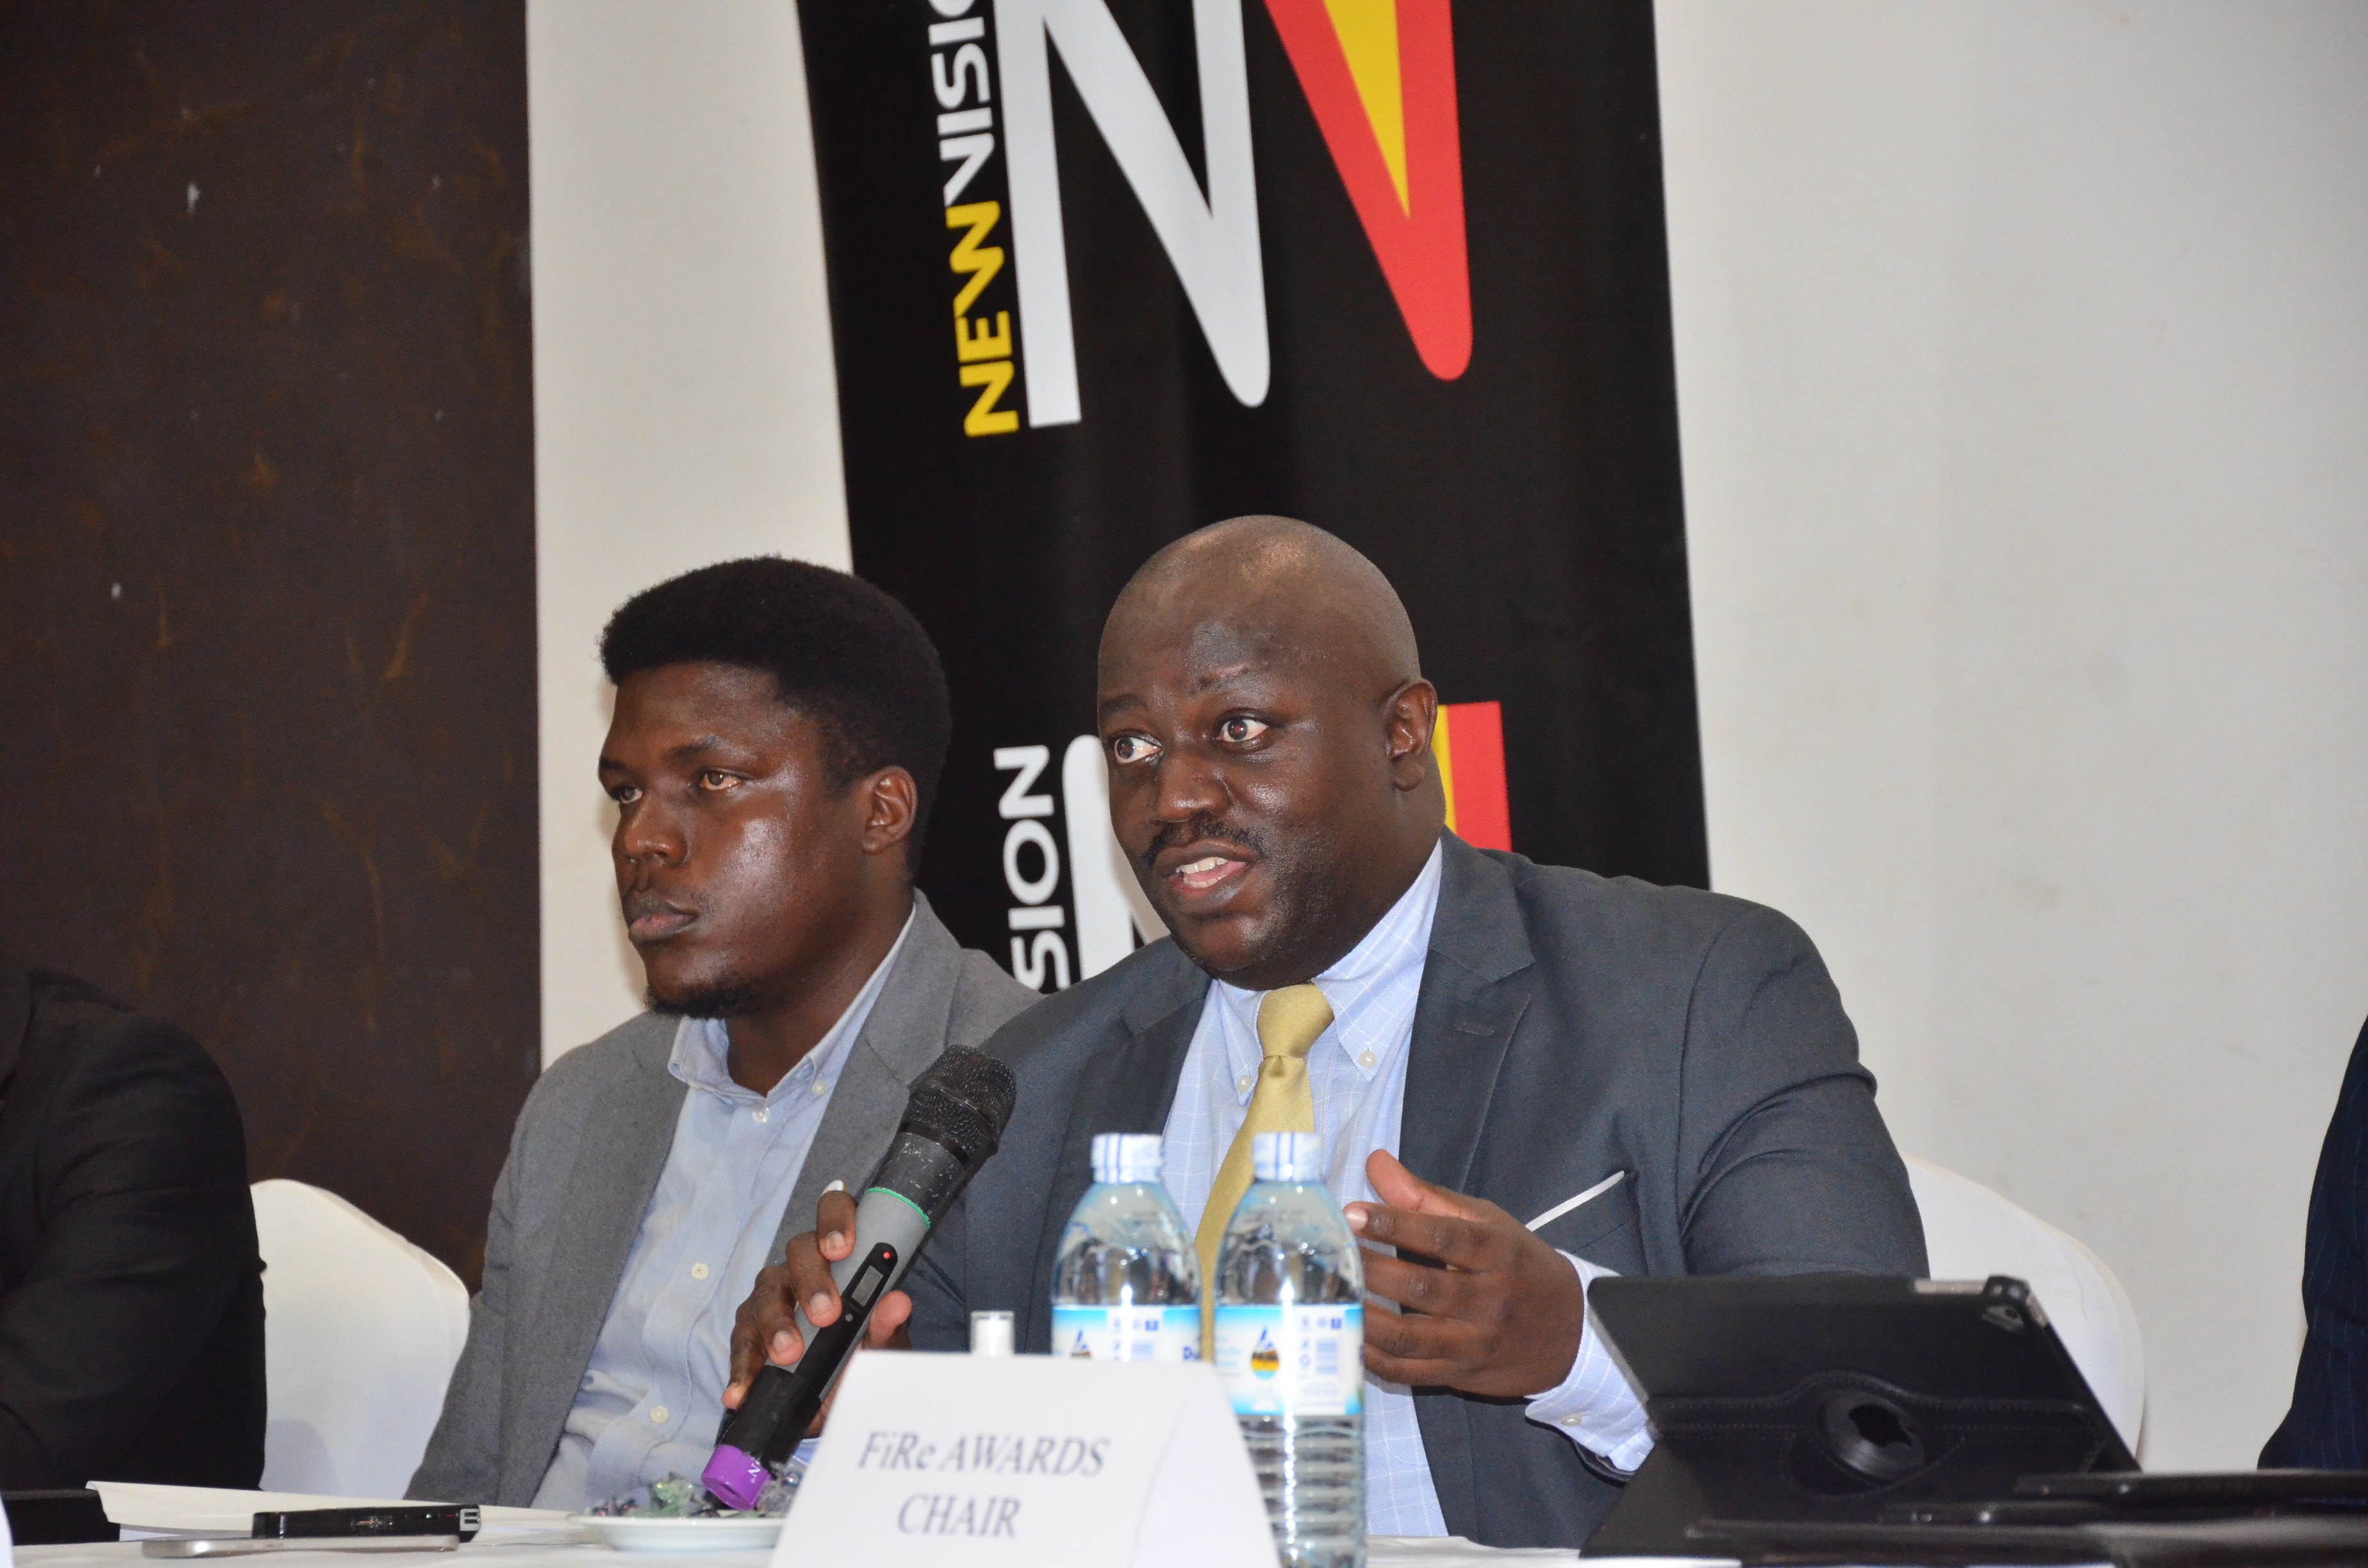 Mr. Ssembuya Dickson, Director of Research and Market Development at Capital Markets Authority, one of the 2023 FiRe awards partners addresses the media.